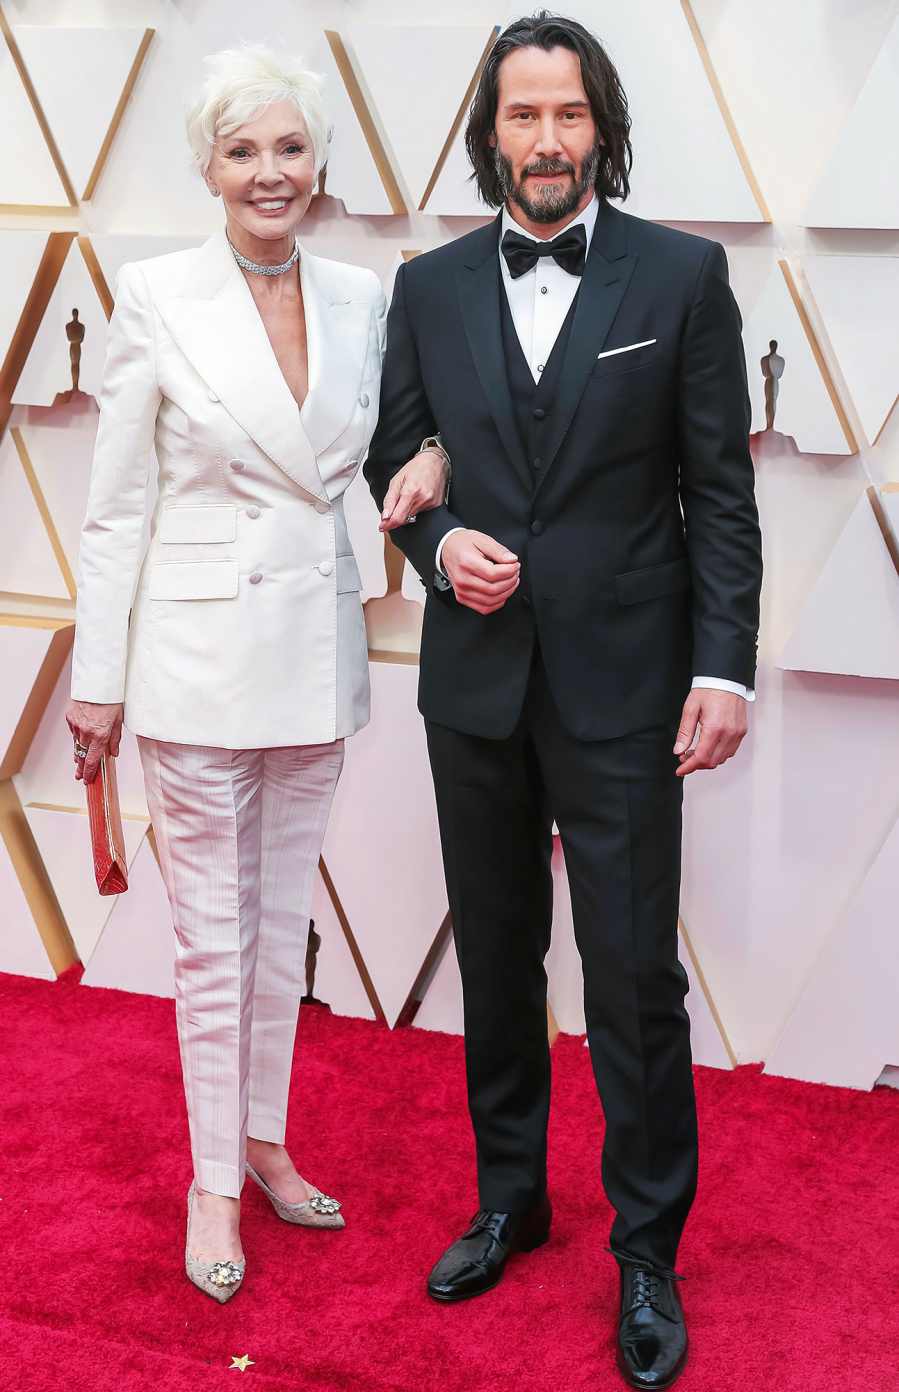 Keanu Reeves and his mother Patricia Taylor Stars Bring Family Members to 2020 Oscars